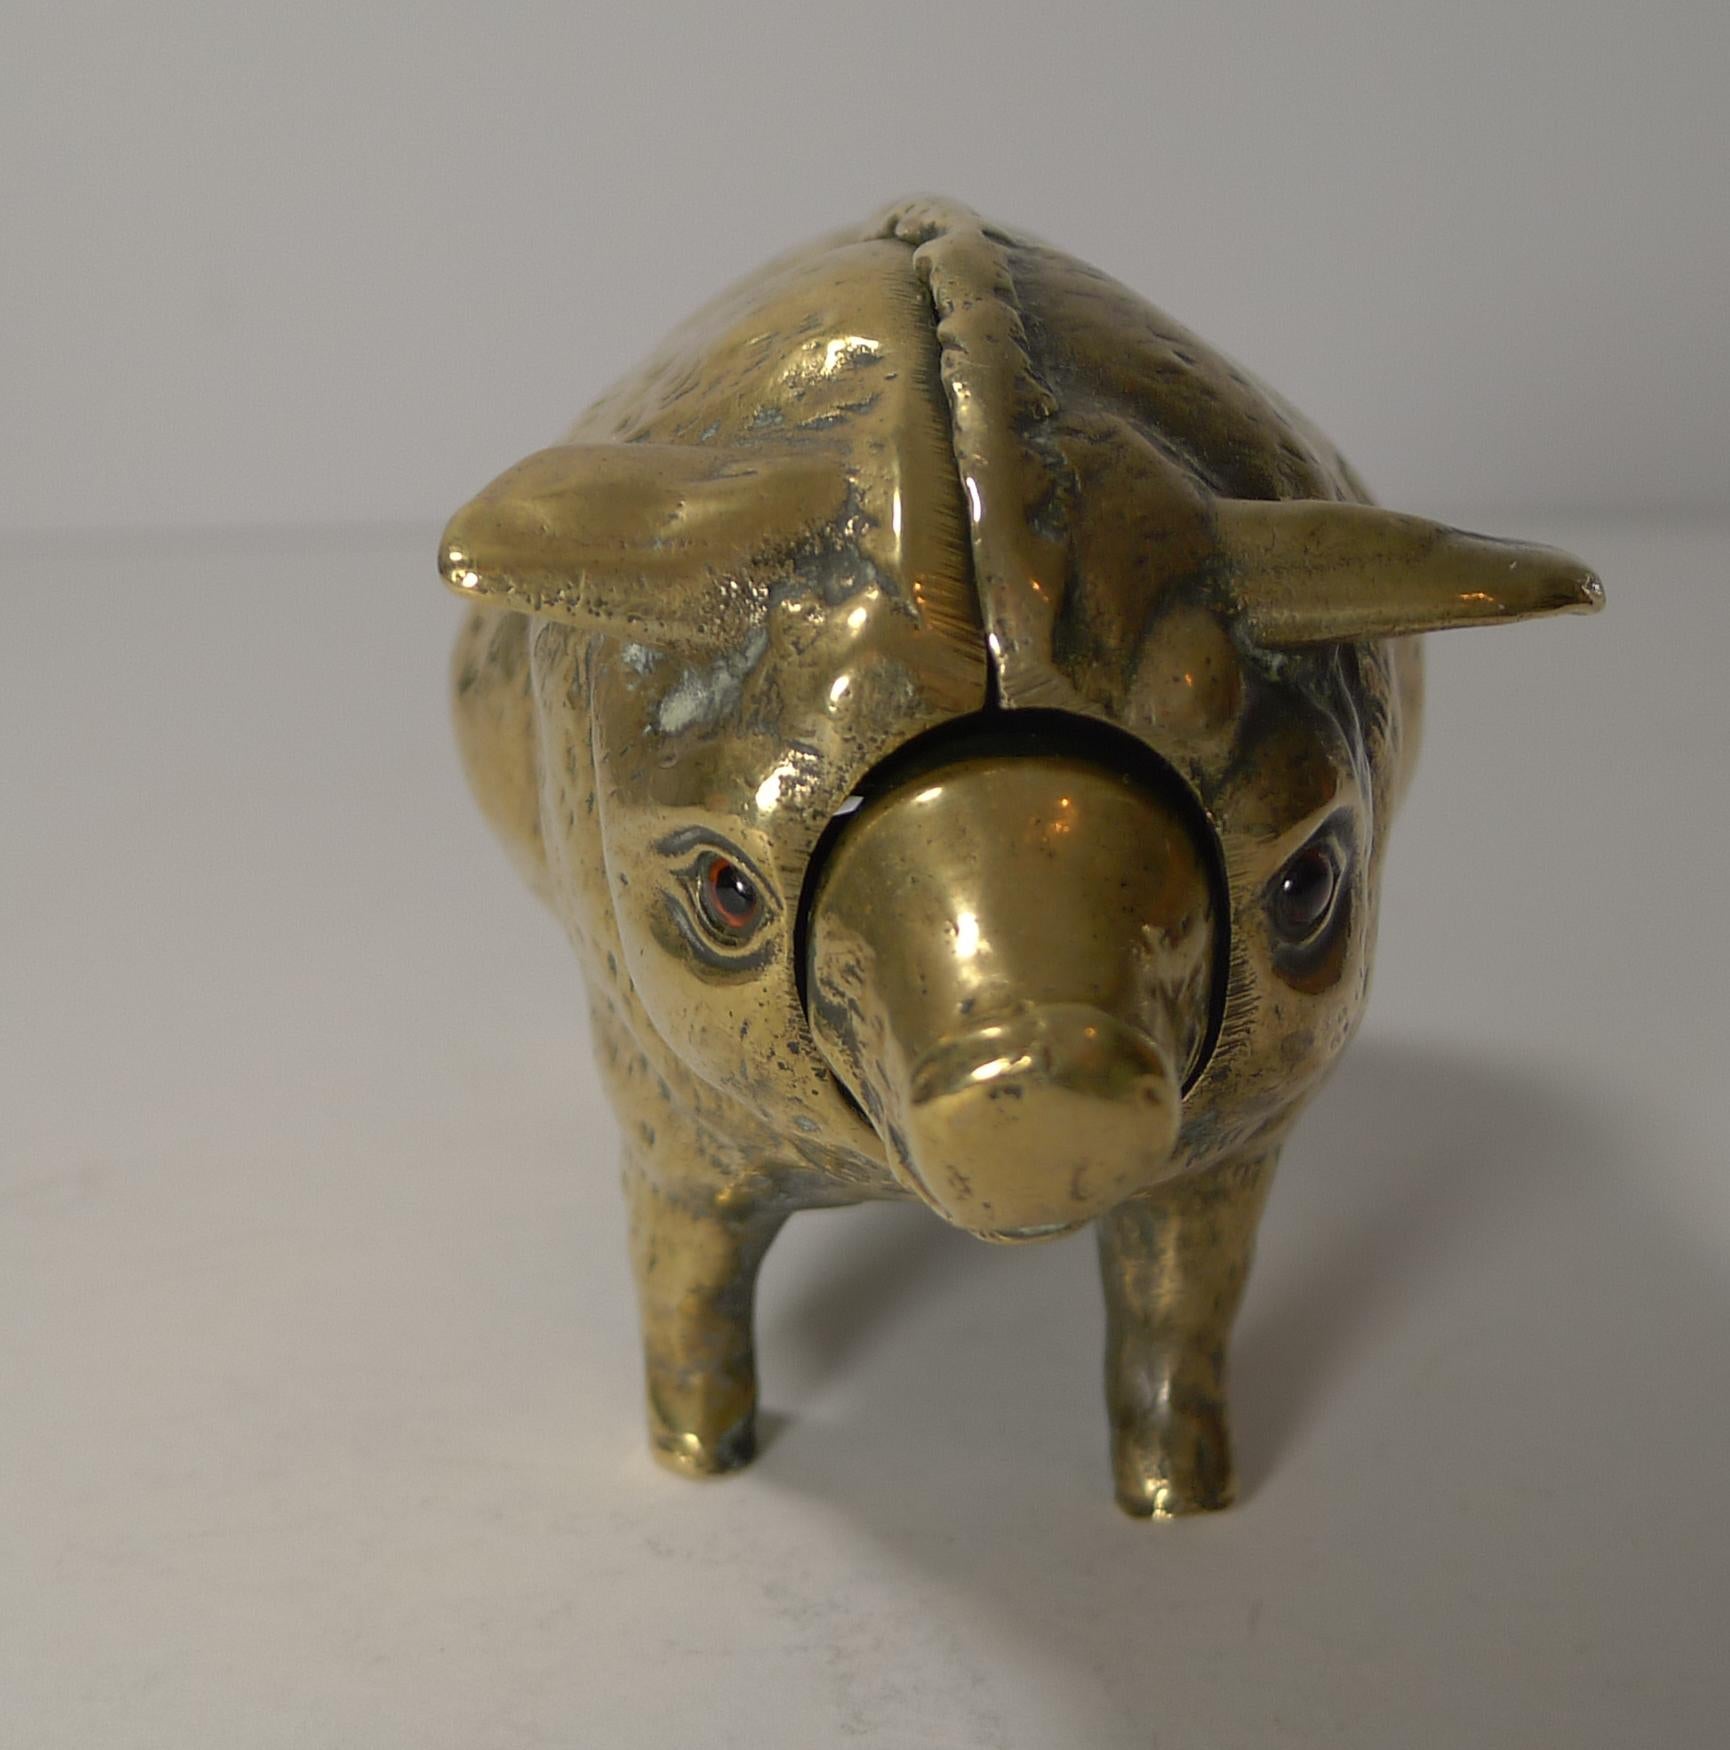 A rare find, this fabulous figural desk bell was cast in brass or polished bronze in the form of a pig with a quality screwed construction. The mechanical bell can be would from the underside and then rung either by the snout or tail (alternately).